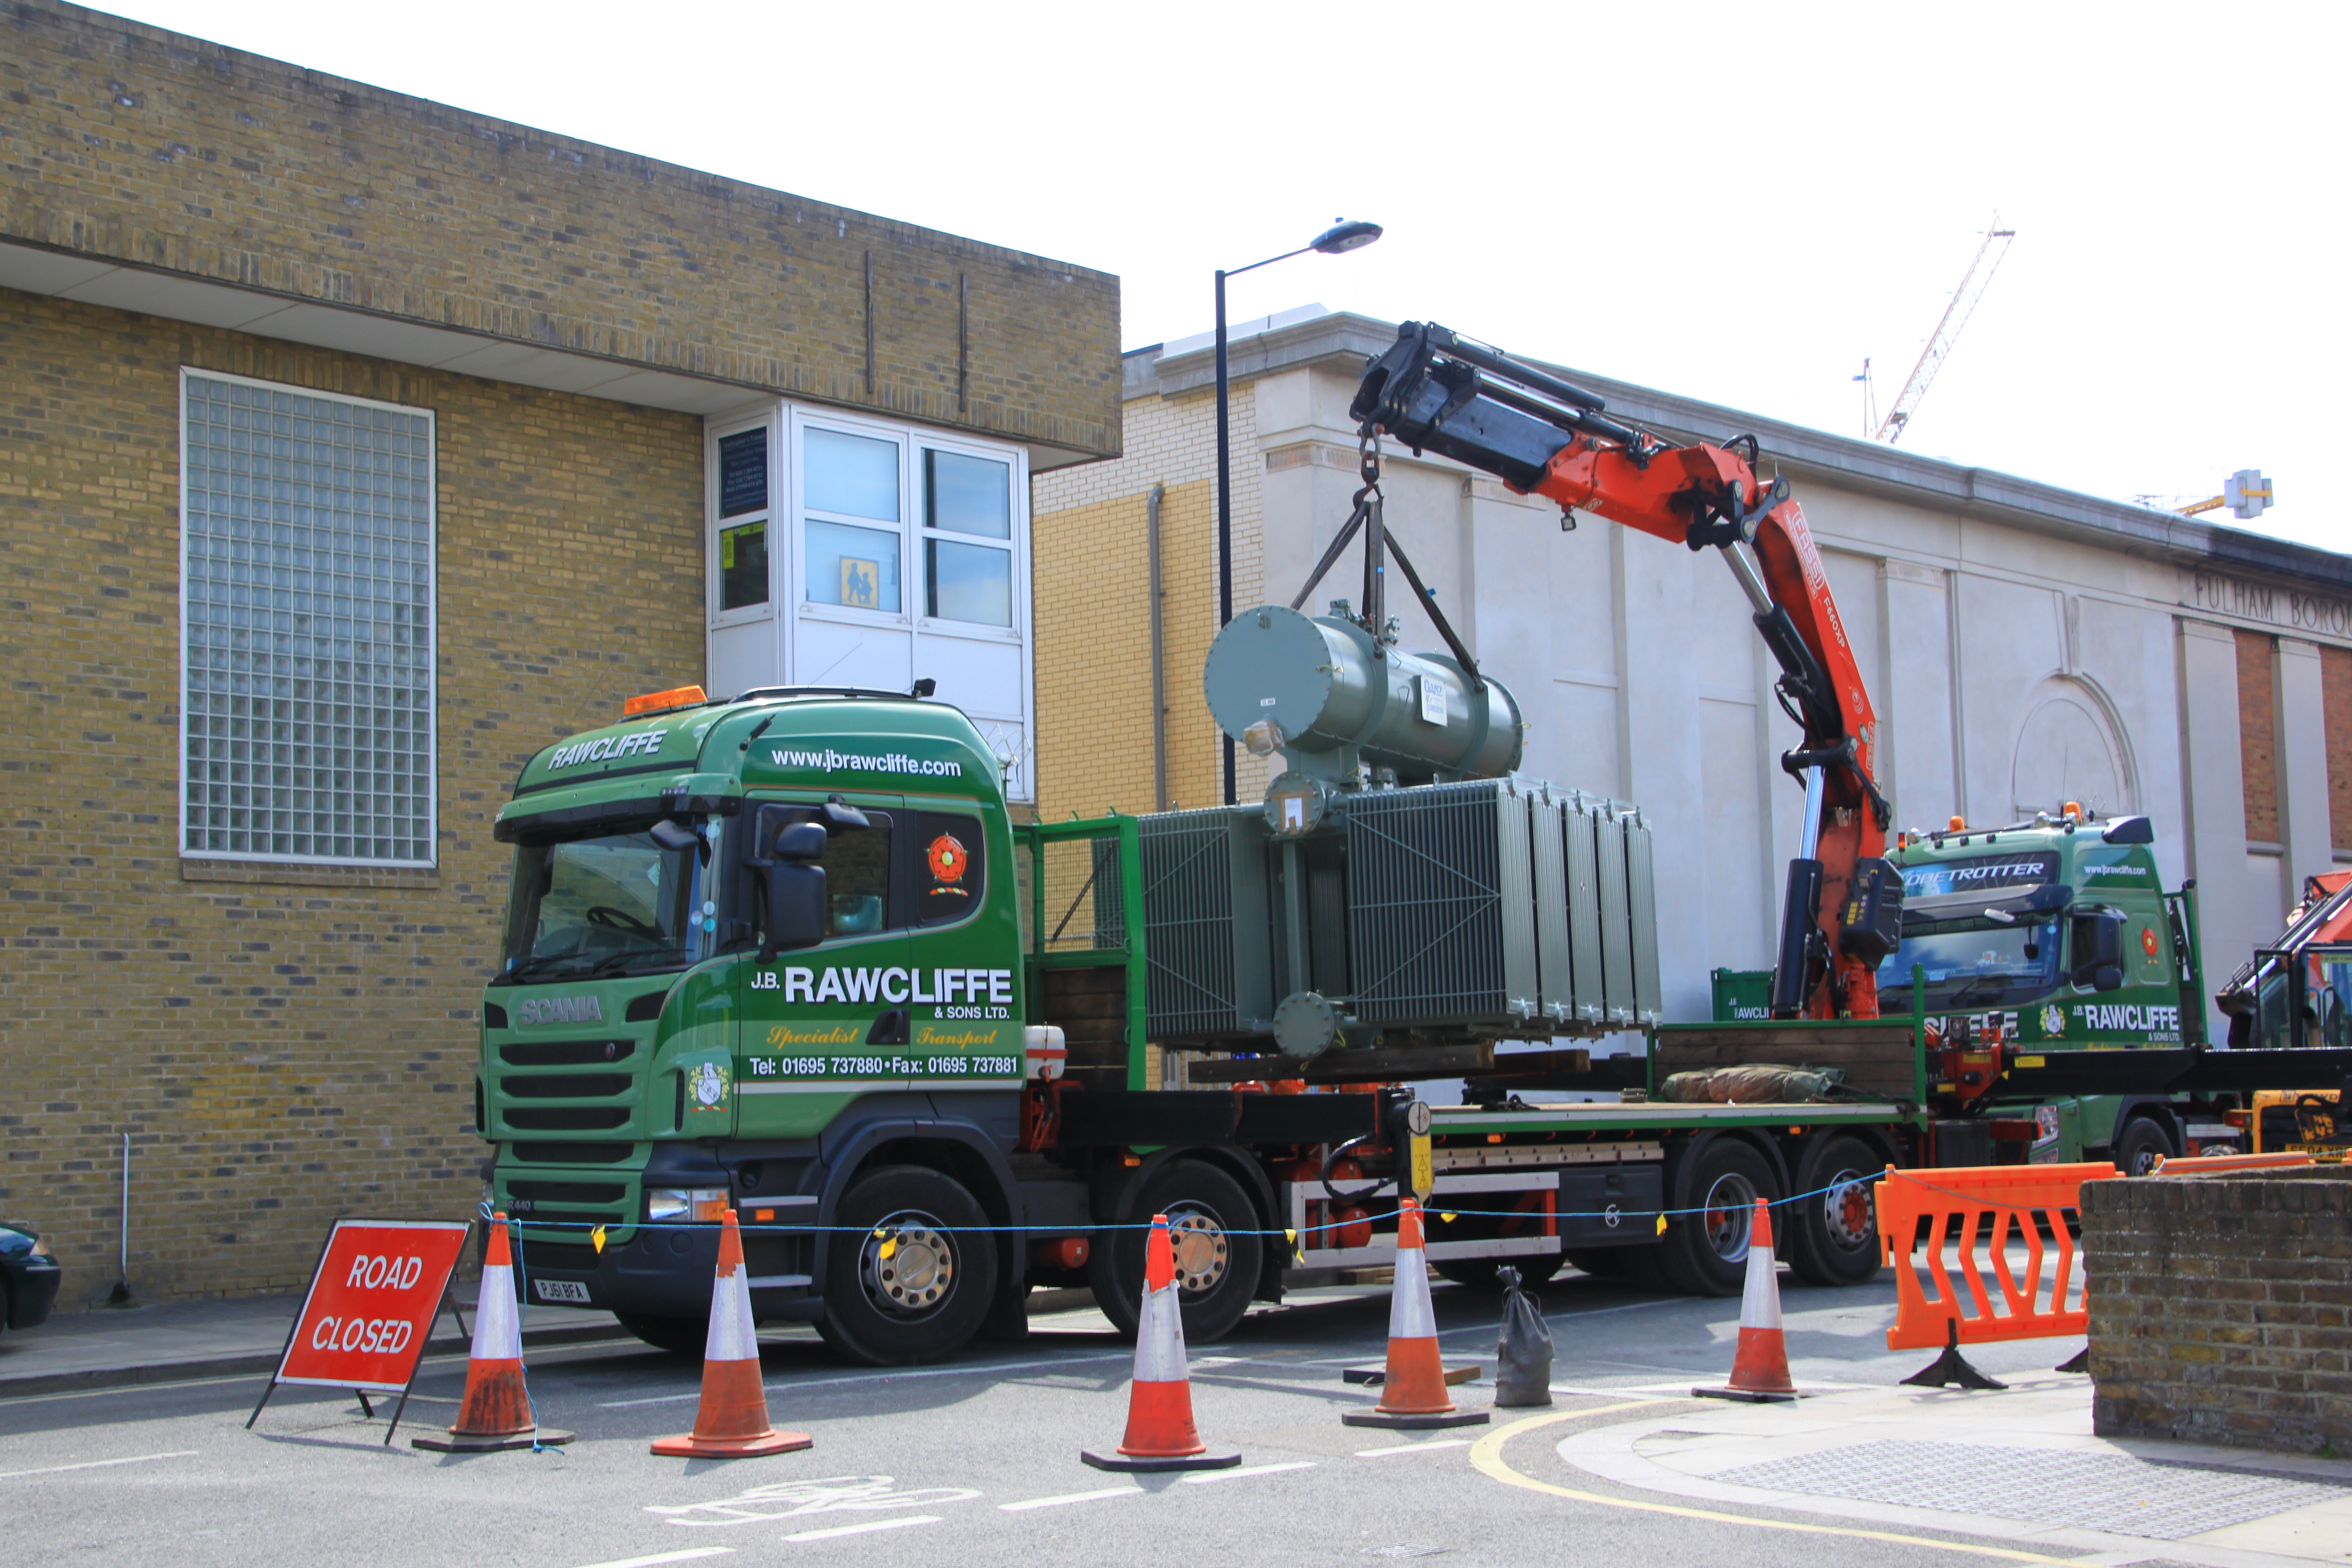 Why Are HIAB Cranes Used?